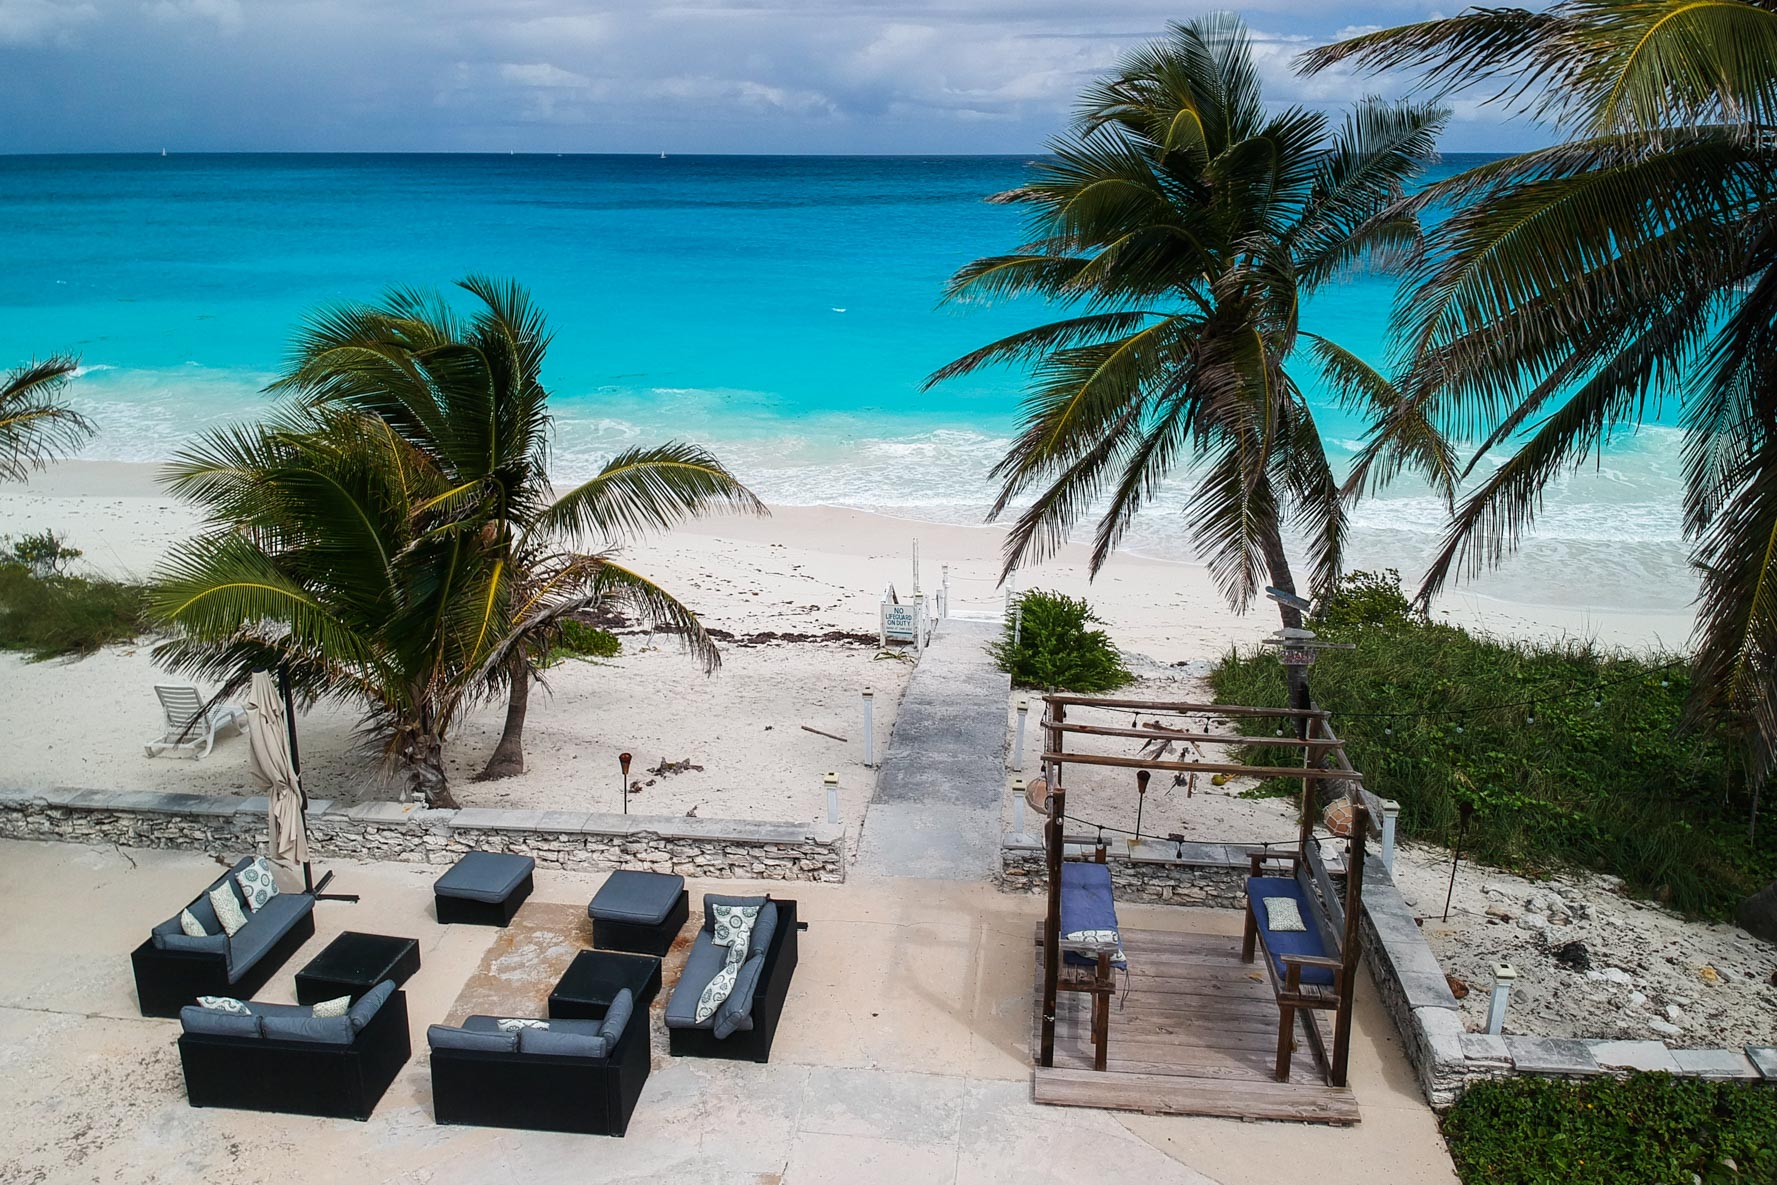 Great Exuma Bahamas - Arial View of Outdoor Seating Area on Beach